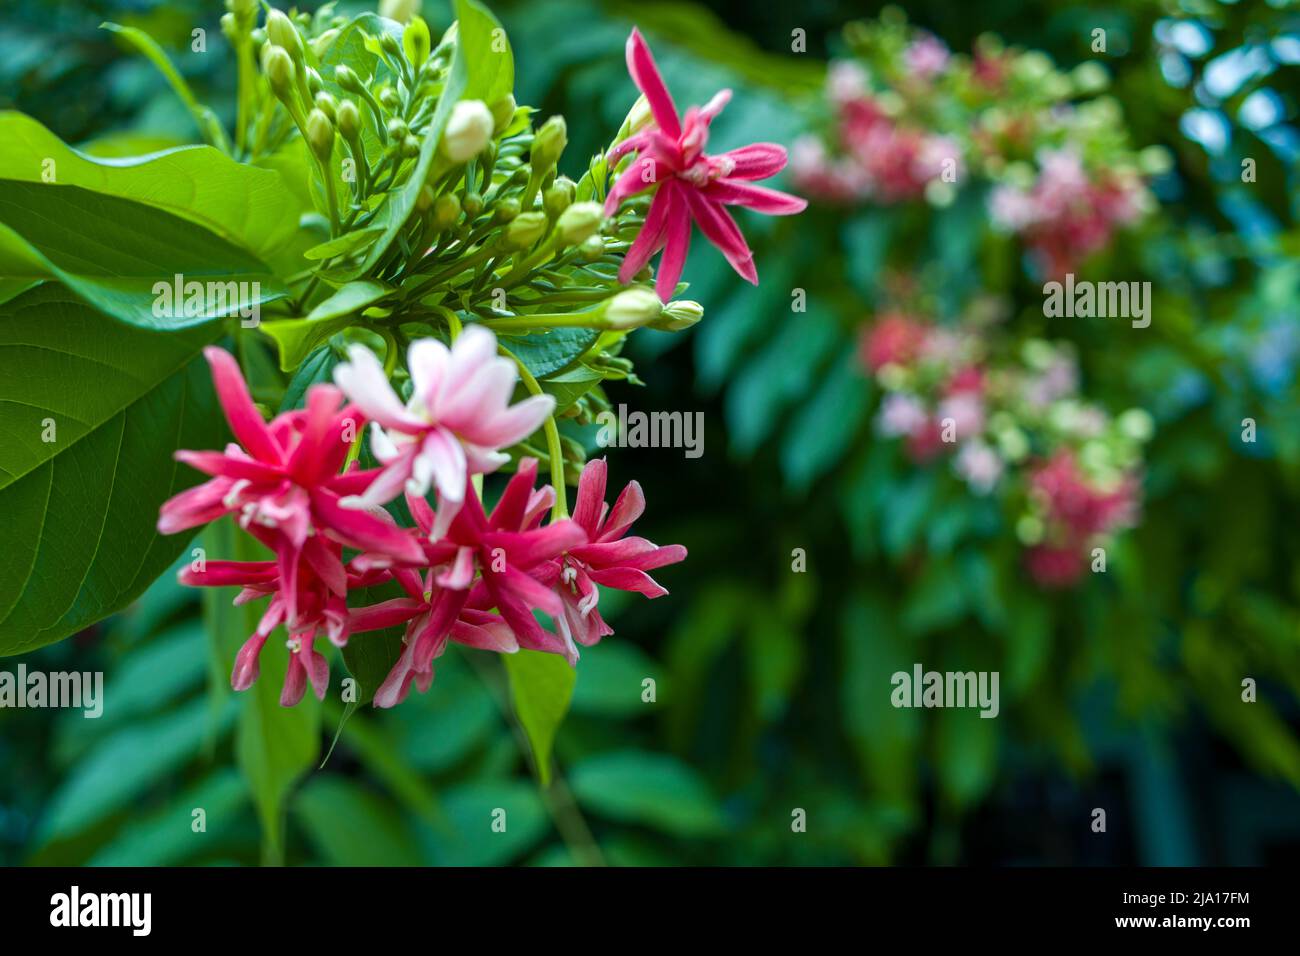 Small pink flowers blooming in garden on blurred of nature background, Quisqualis Indica flower plant , Chinese honeysuckle, Rangoon Creeper or Combre Stock Photo